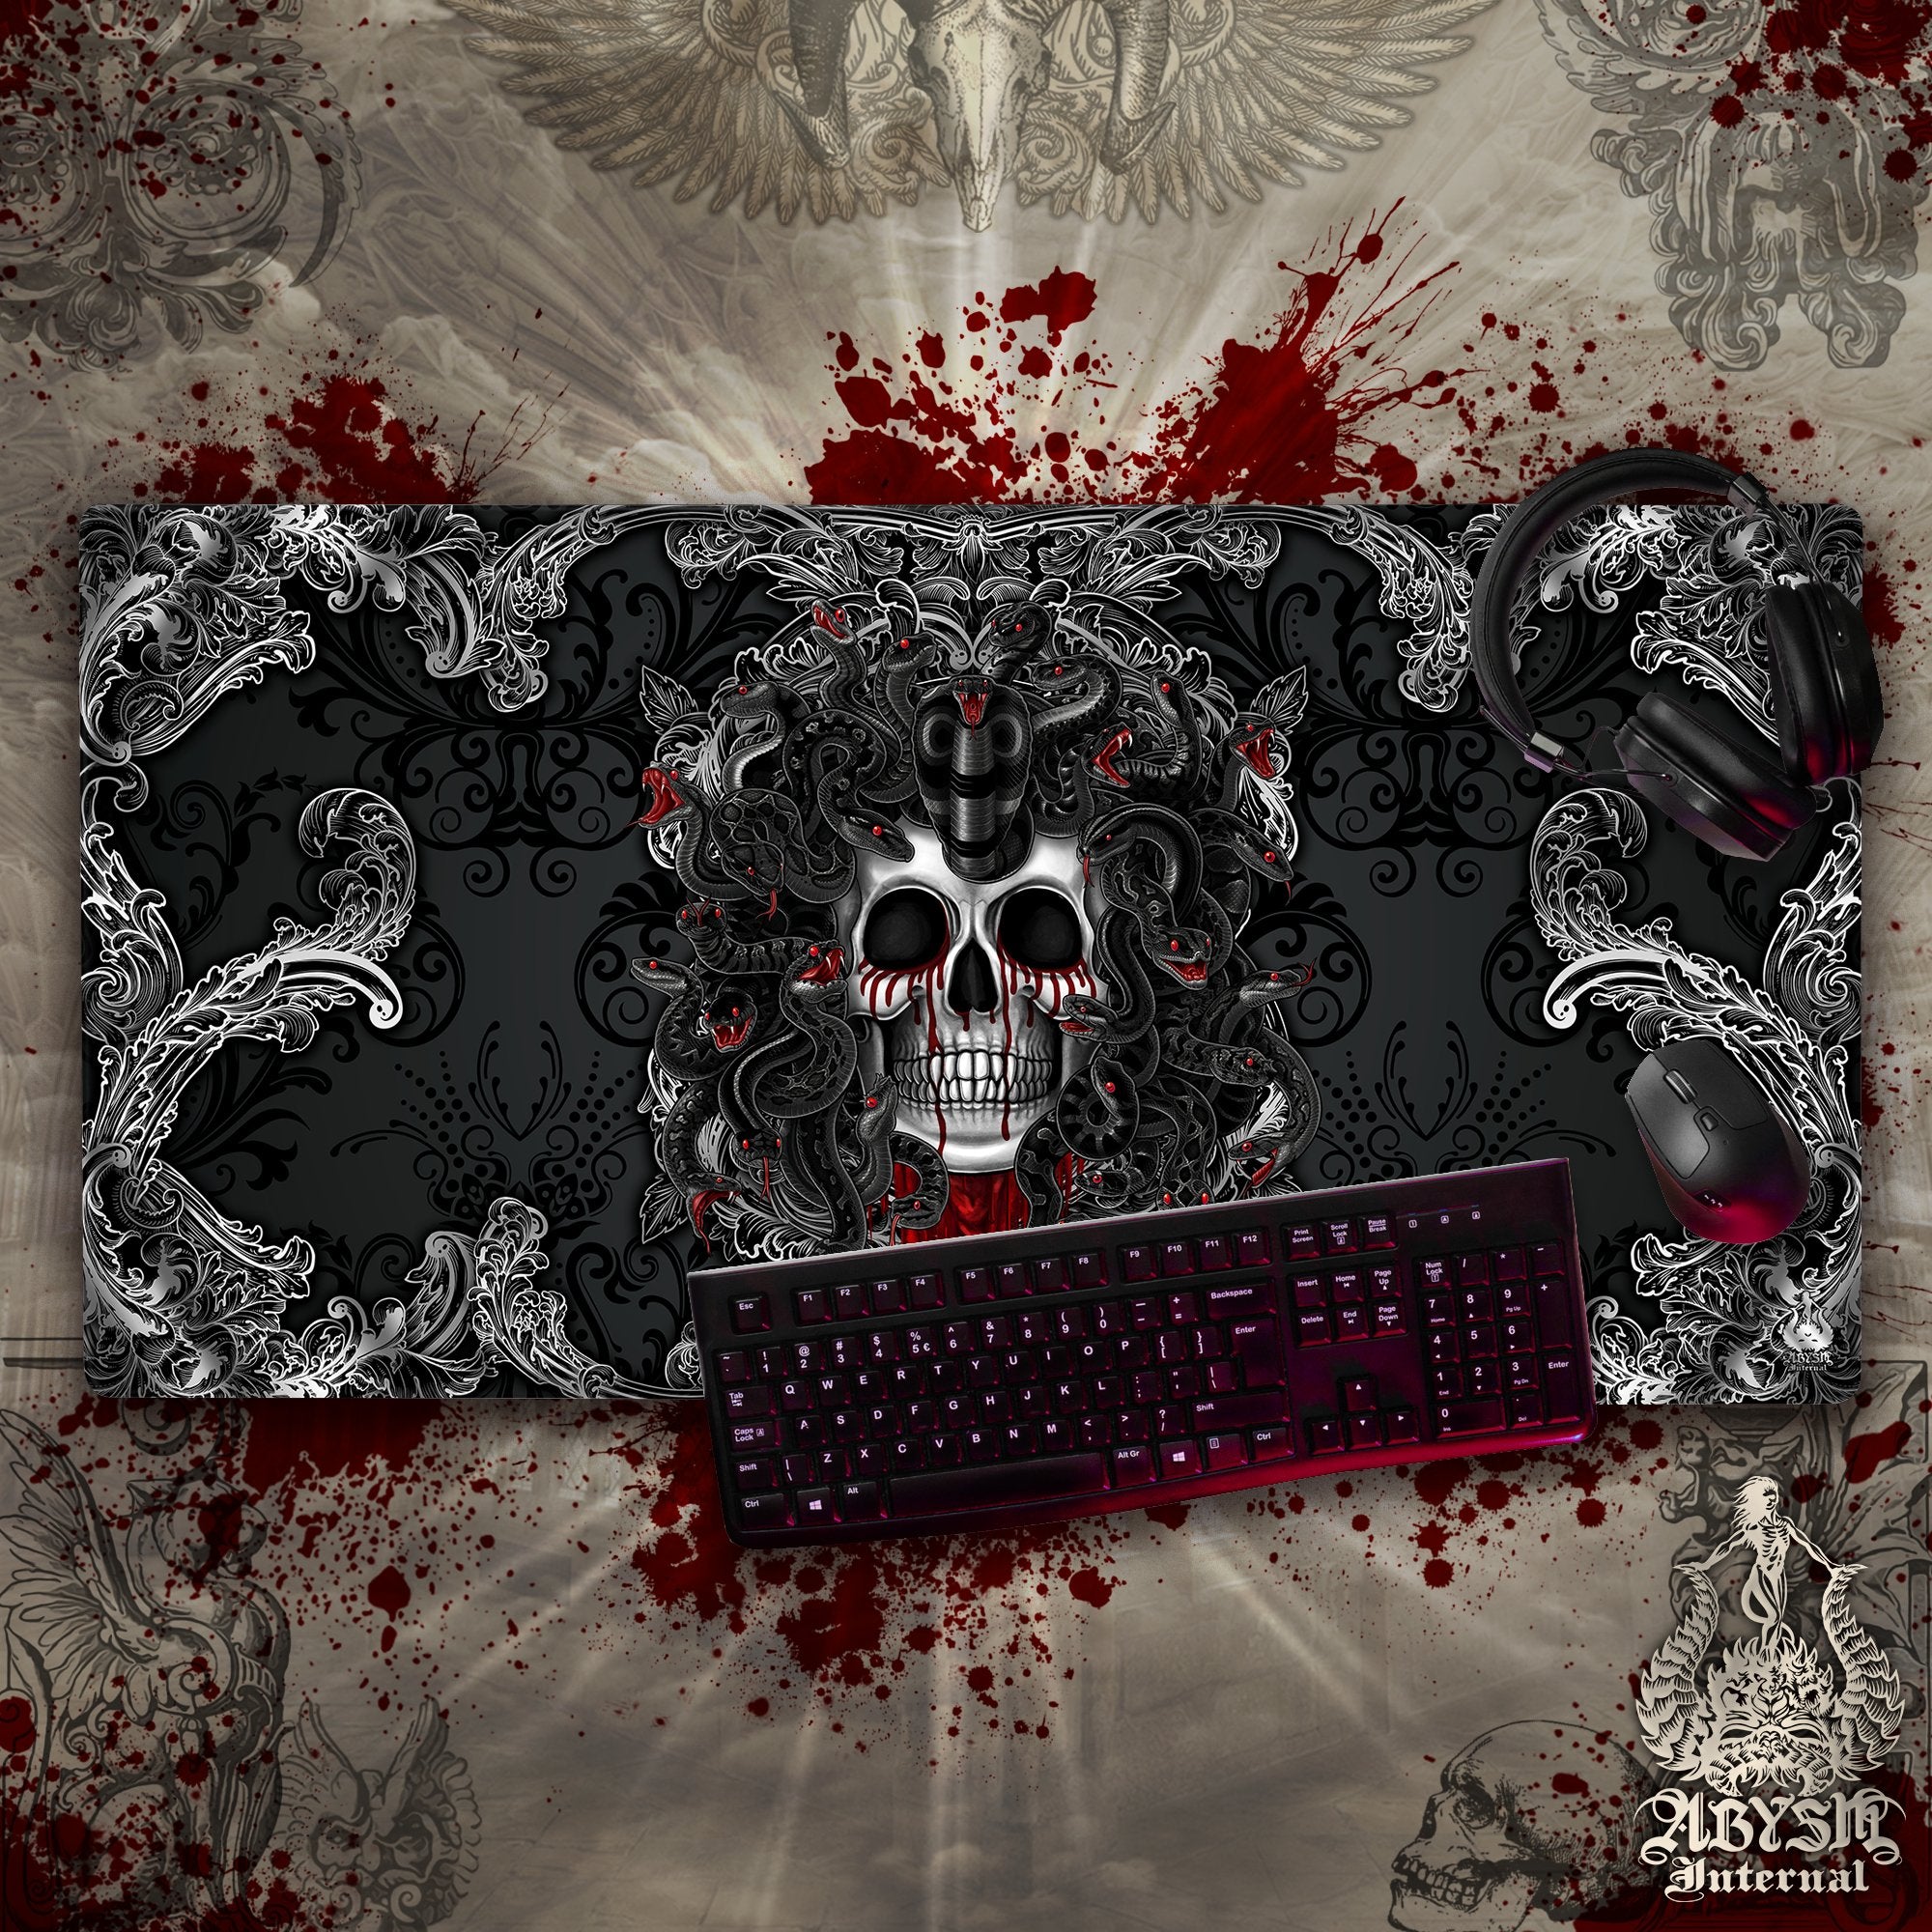 Gothic Gaming Mouse Pad, Medusa Skull Desk Mat, Gamer Table Protector Cover, Nu Goth Workpad, Dark Fantasy Art Print - 3 Colors, 2 Faces - Abysm Internal